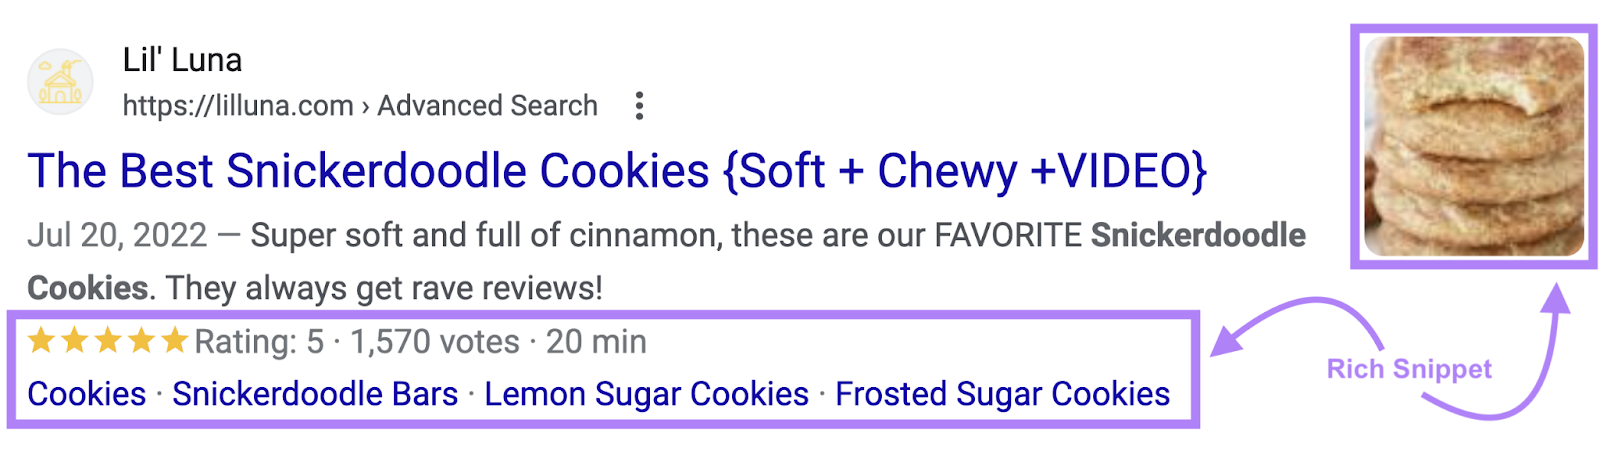 google serp listing for best snickerdoodle cookies with rich snippet data like an image of cookies, star rating, and time to bake.